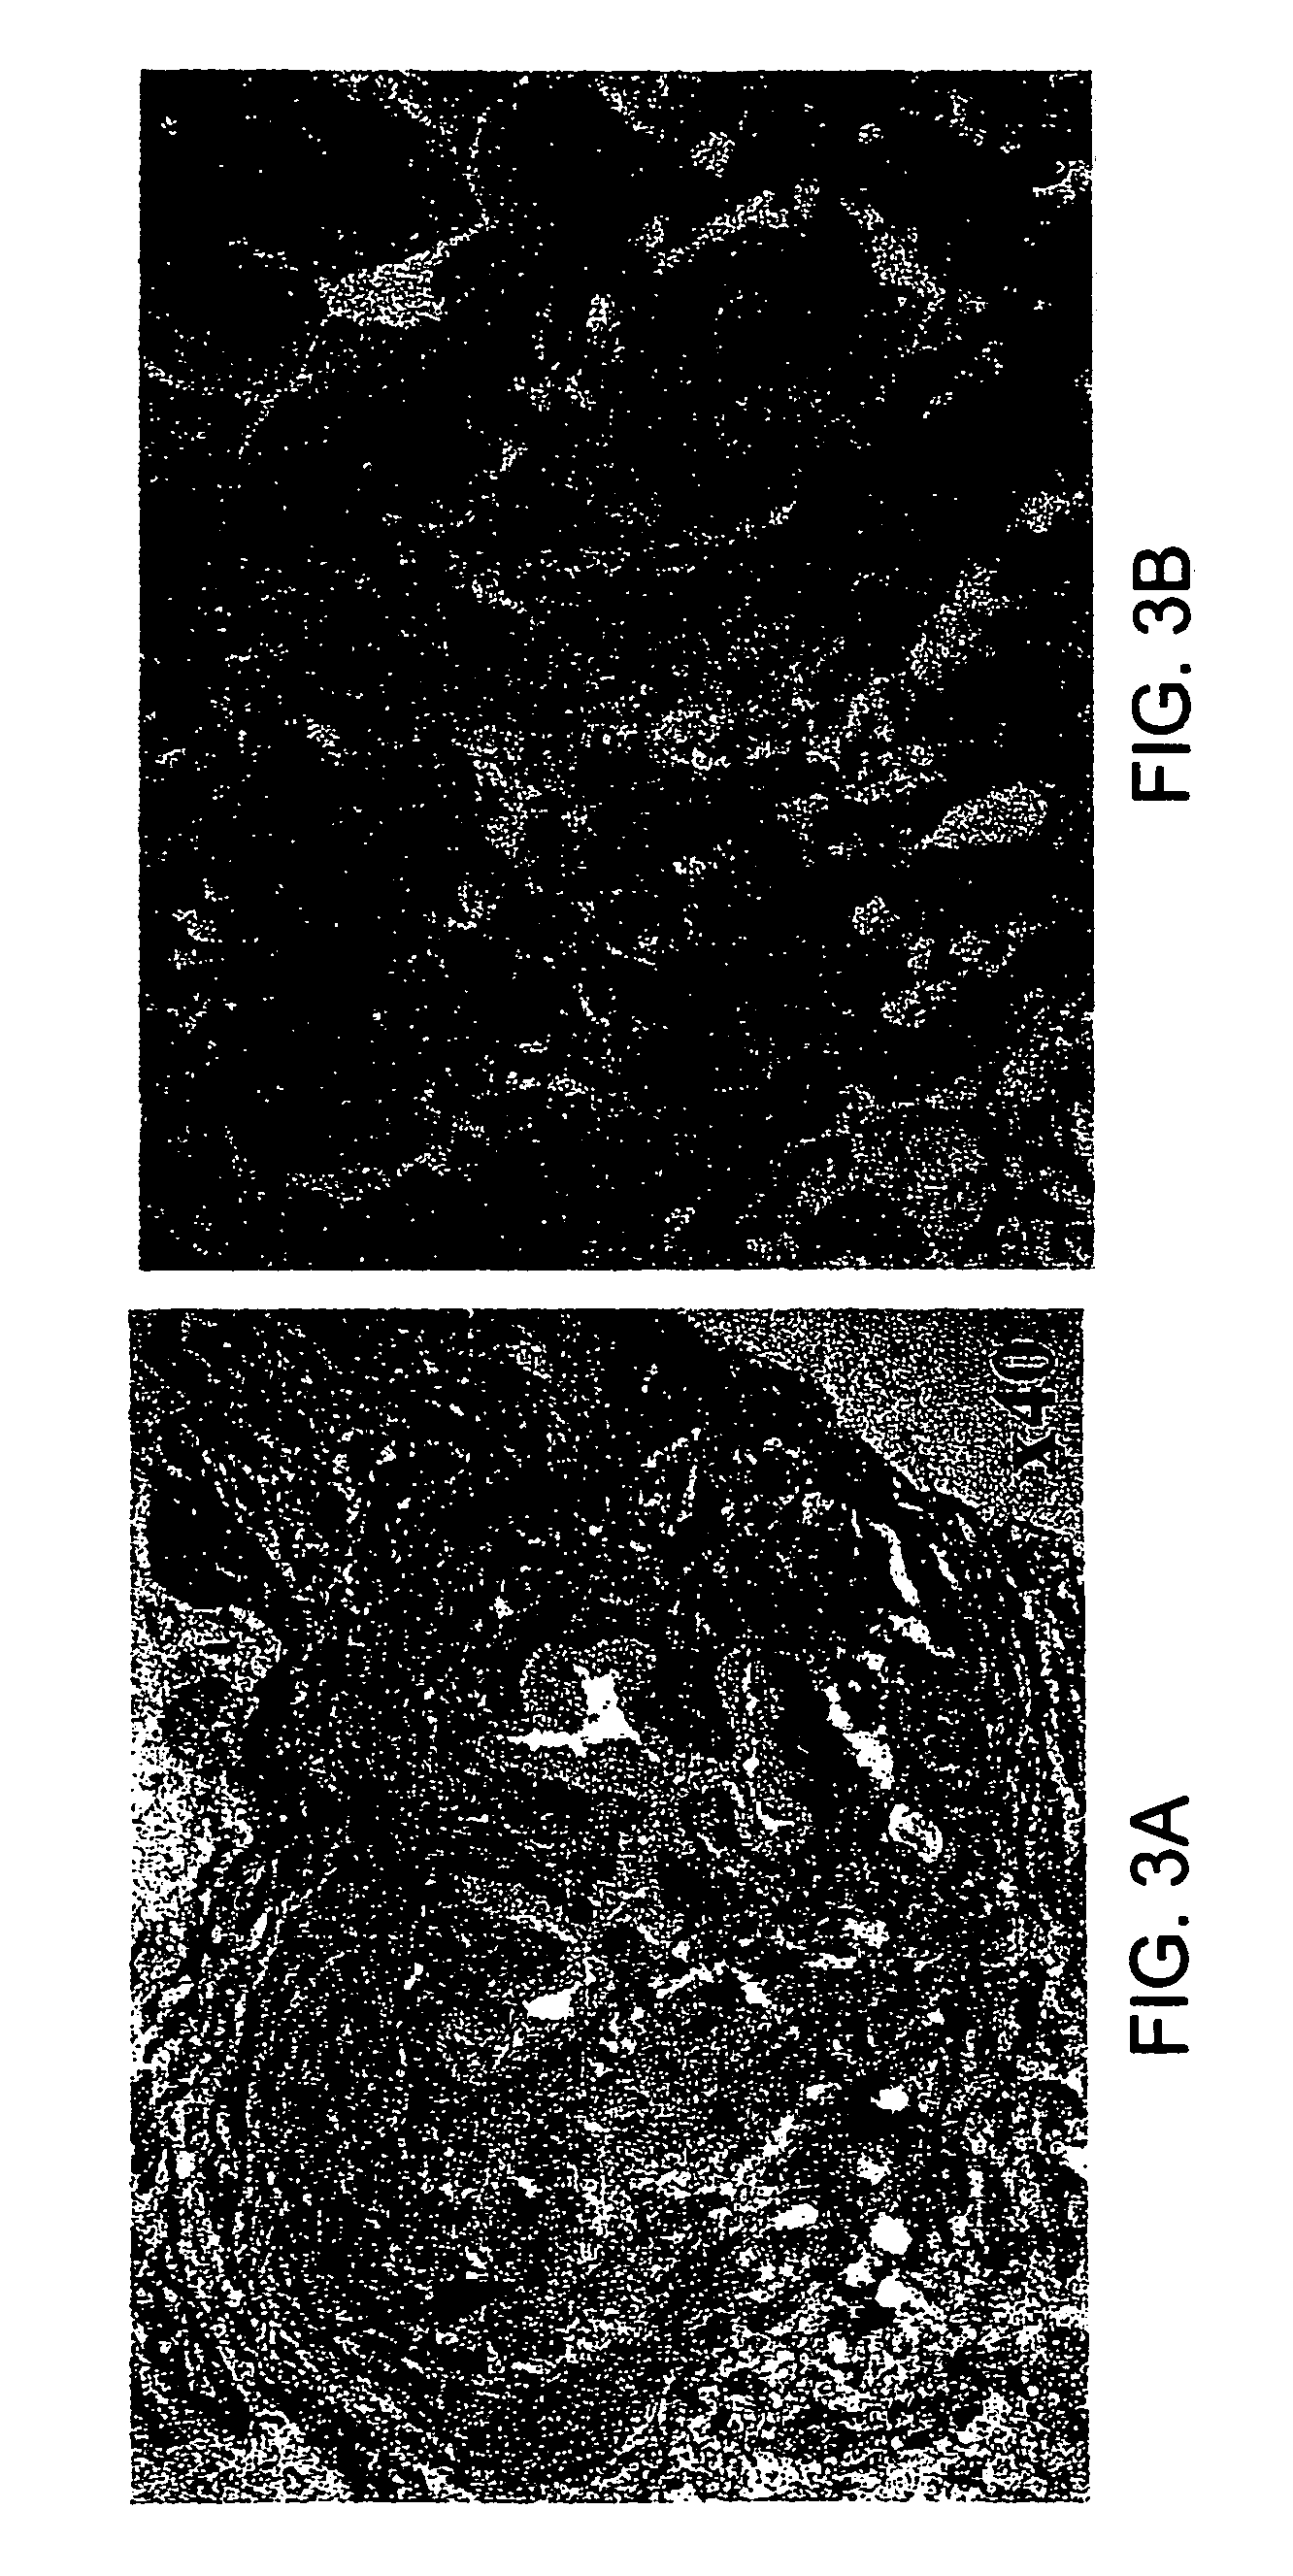 Soft tissue and bone augmentation and bulking utilizing muscle-derived progenitor cells, compositions and treatments thereof